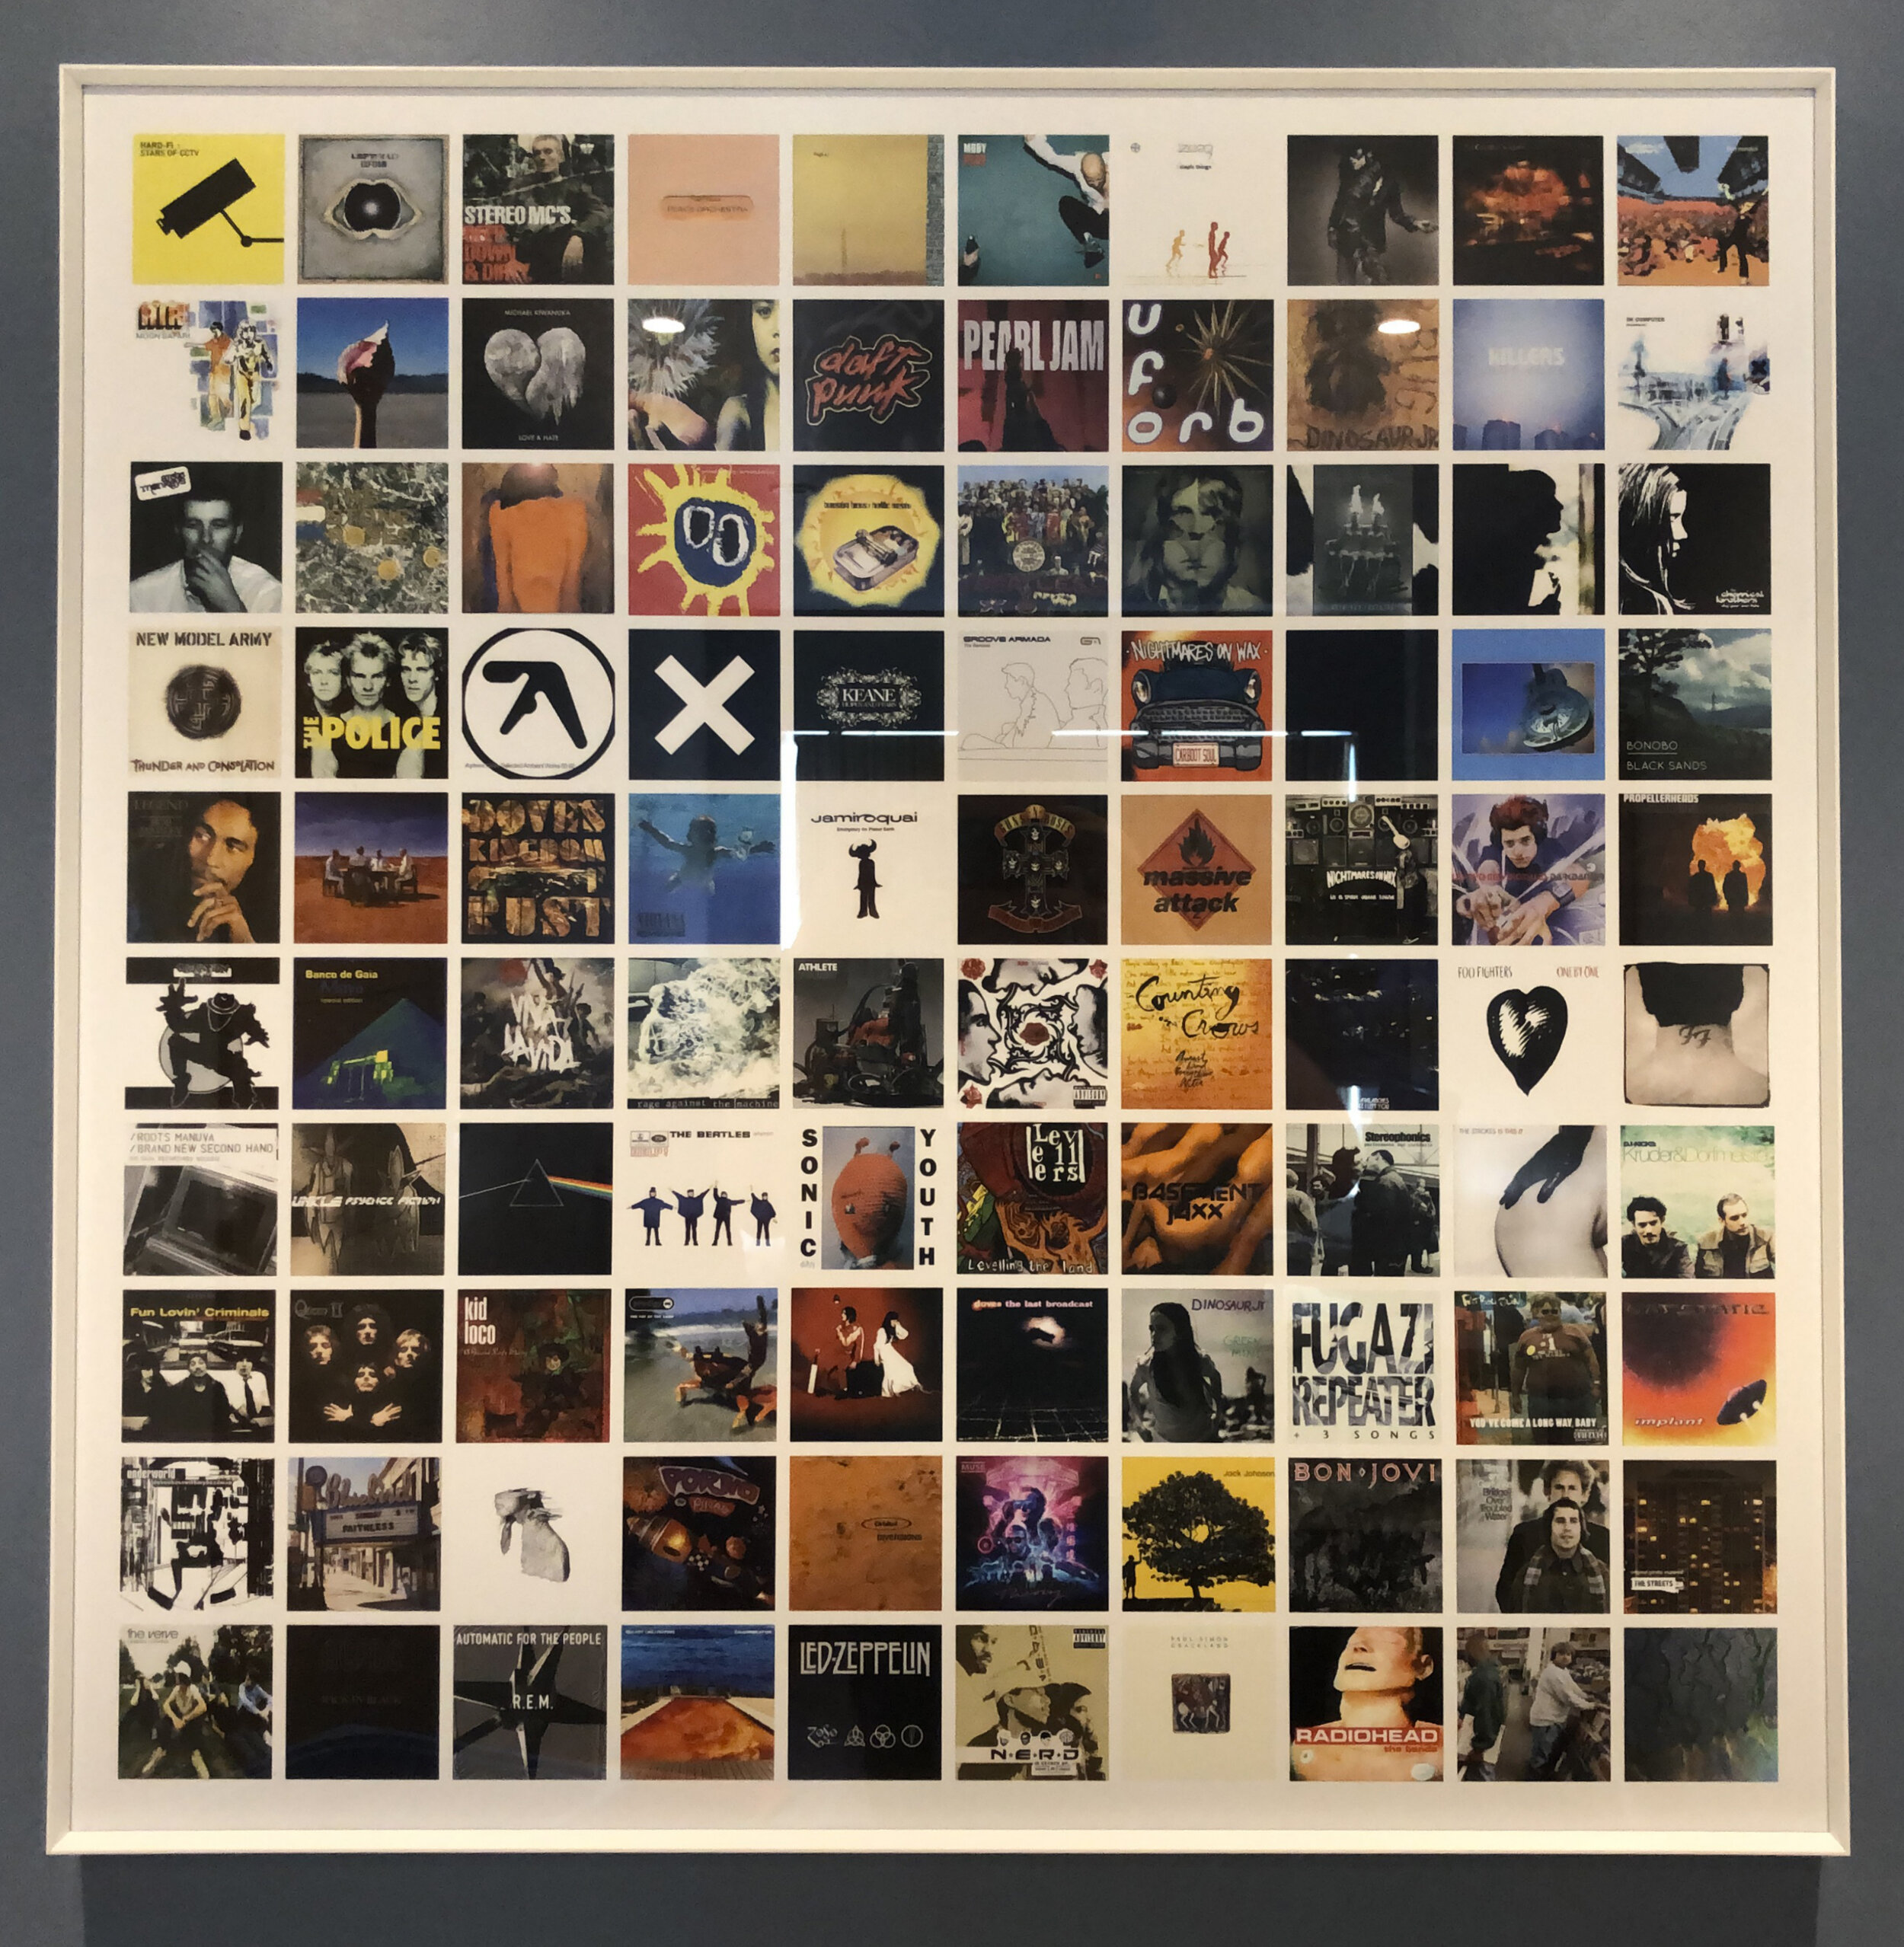 How To Make An Art Poster Print From Your Favourite Music Album Covers The Picture Framers